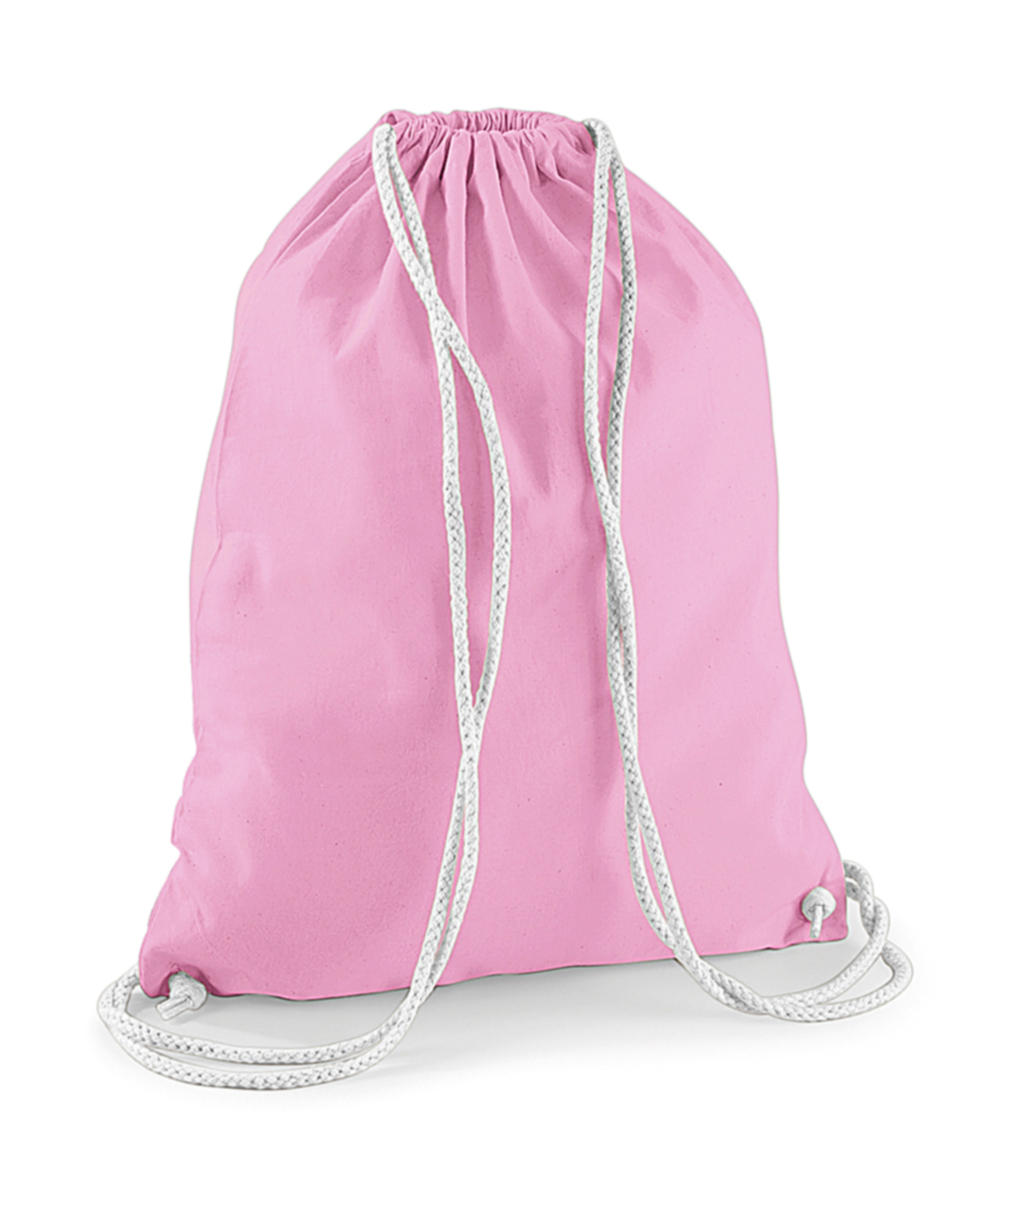  Cotton Gymsac in Farbe Classic Pink/White